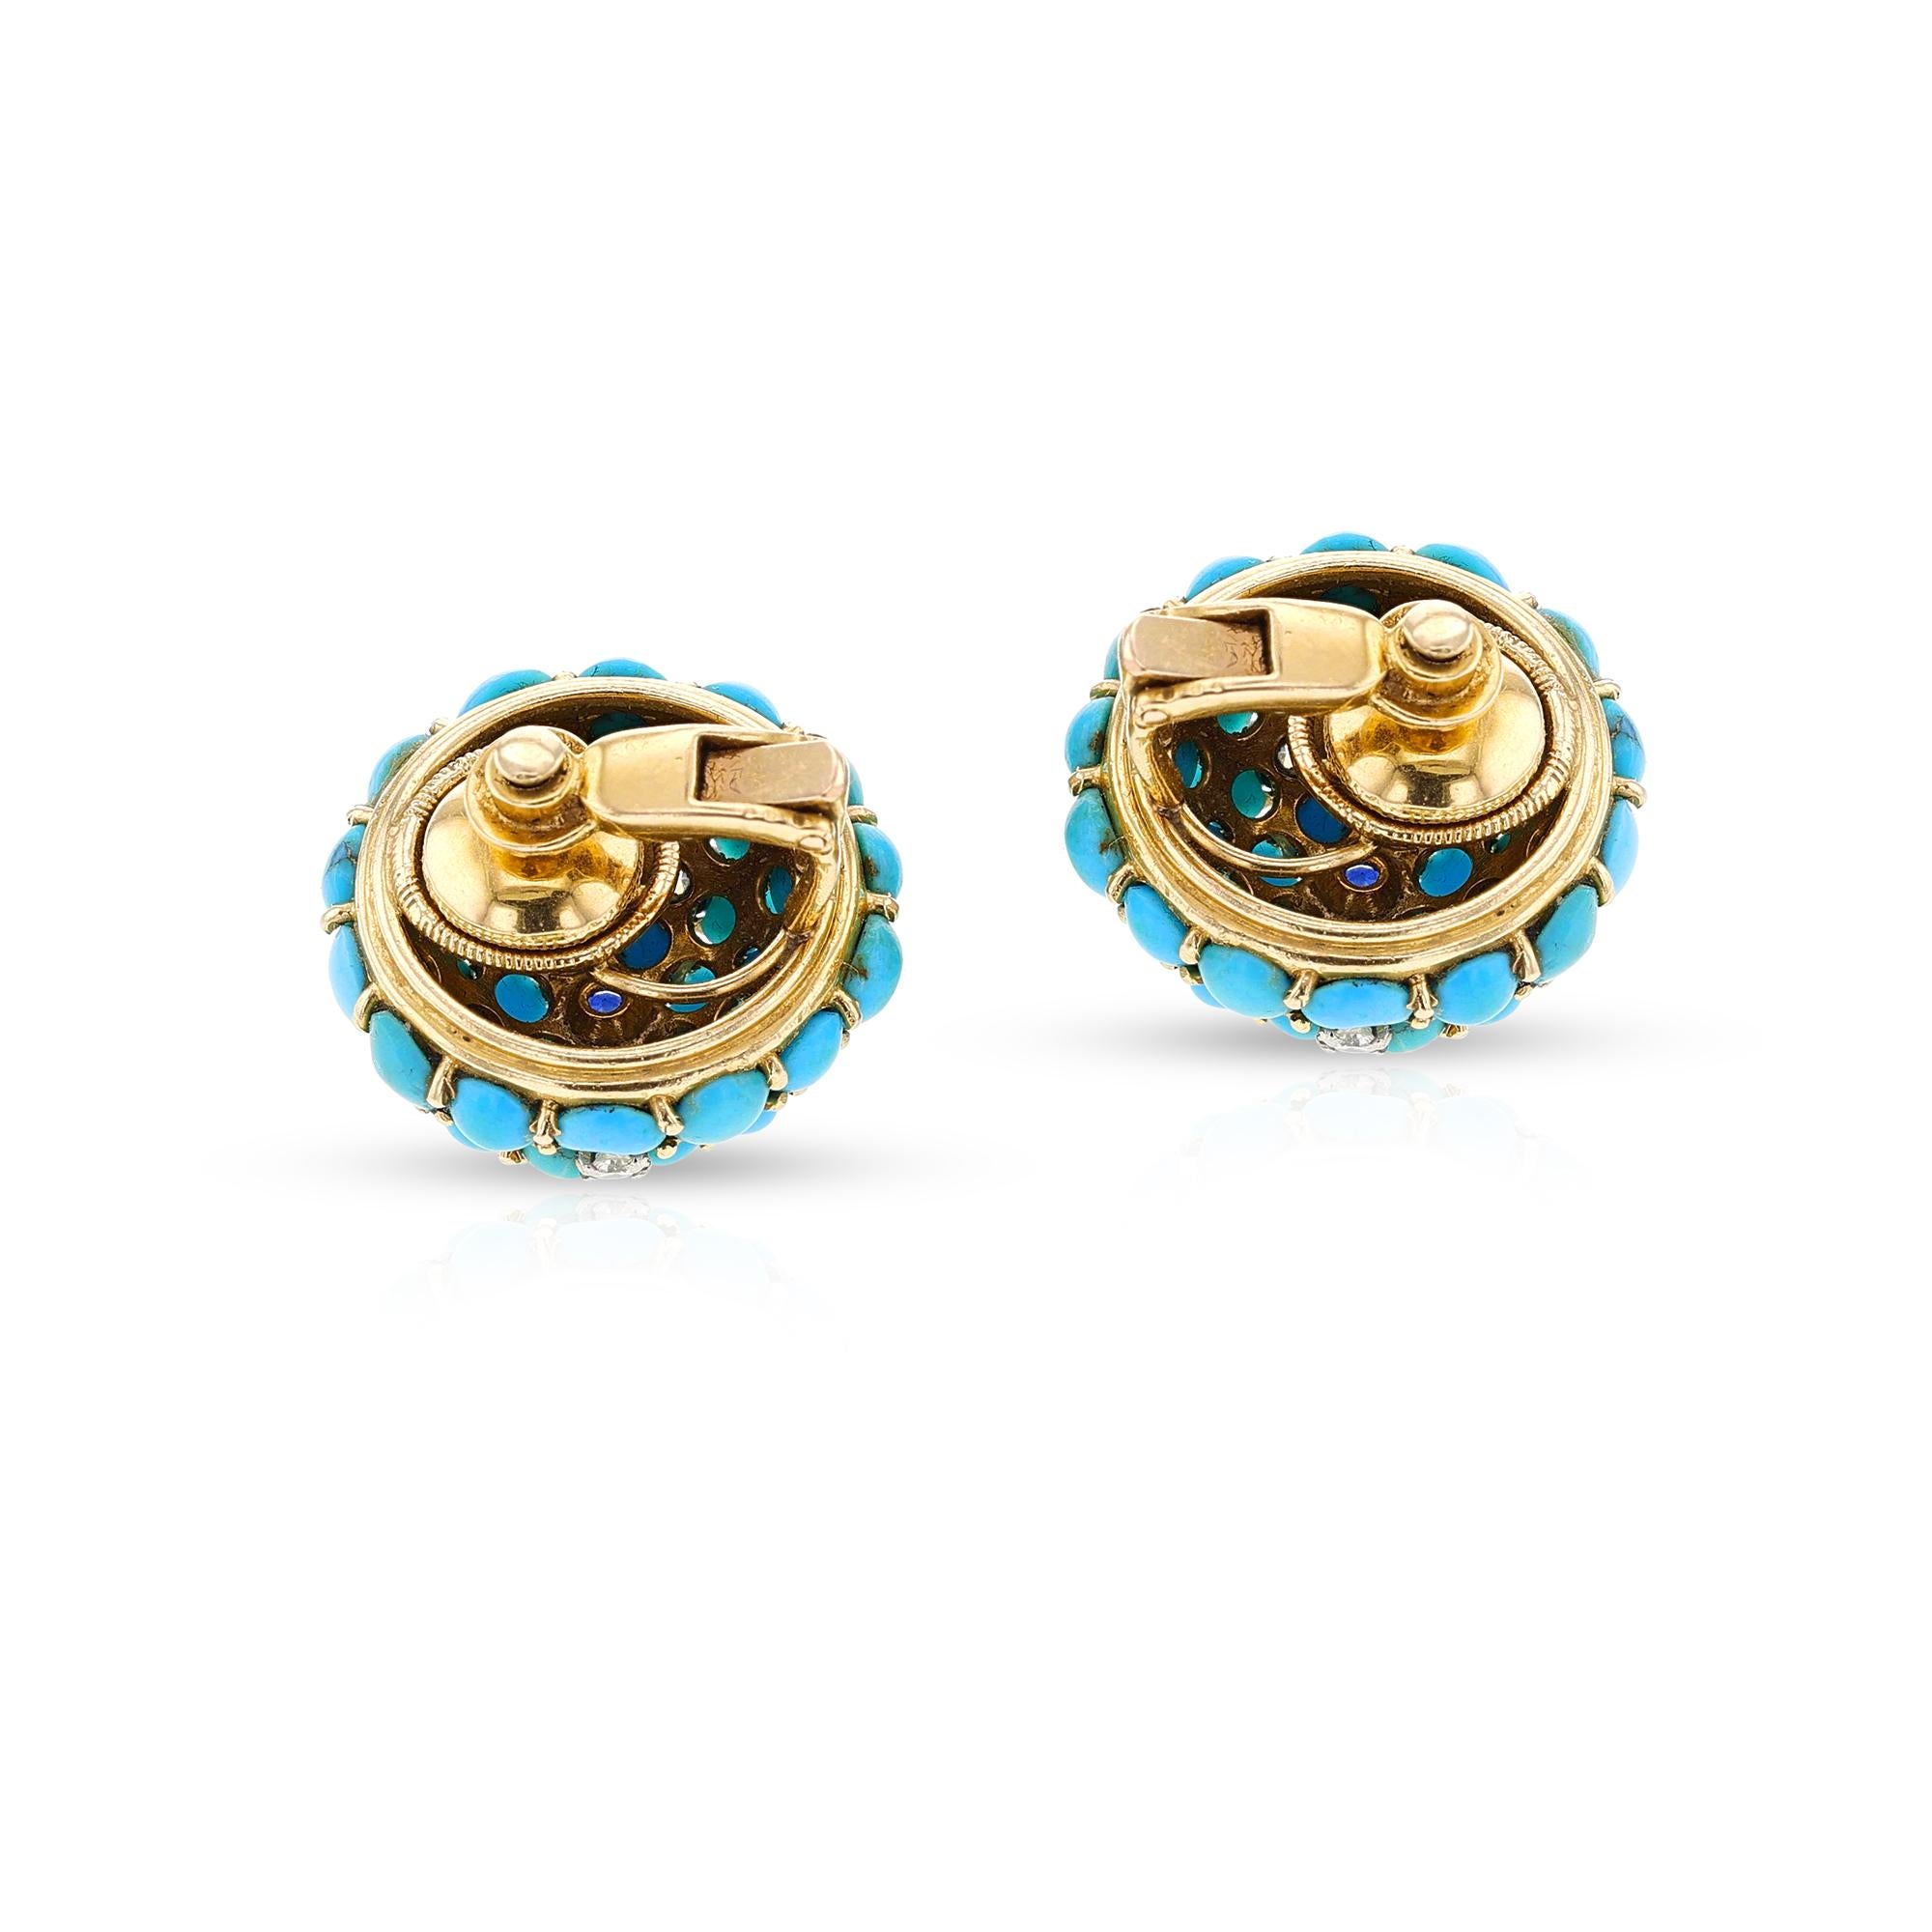 A stunning pair of Round Earrings set with Turquoise Cabochons, a center Sapphire and four Diamonds on each. Set in 18K Yellow Gold. Total Weight: 22.60 grams. 



SKU 1250-BDJAMPL